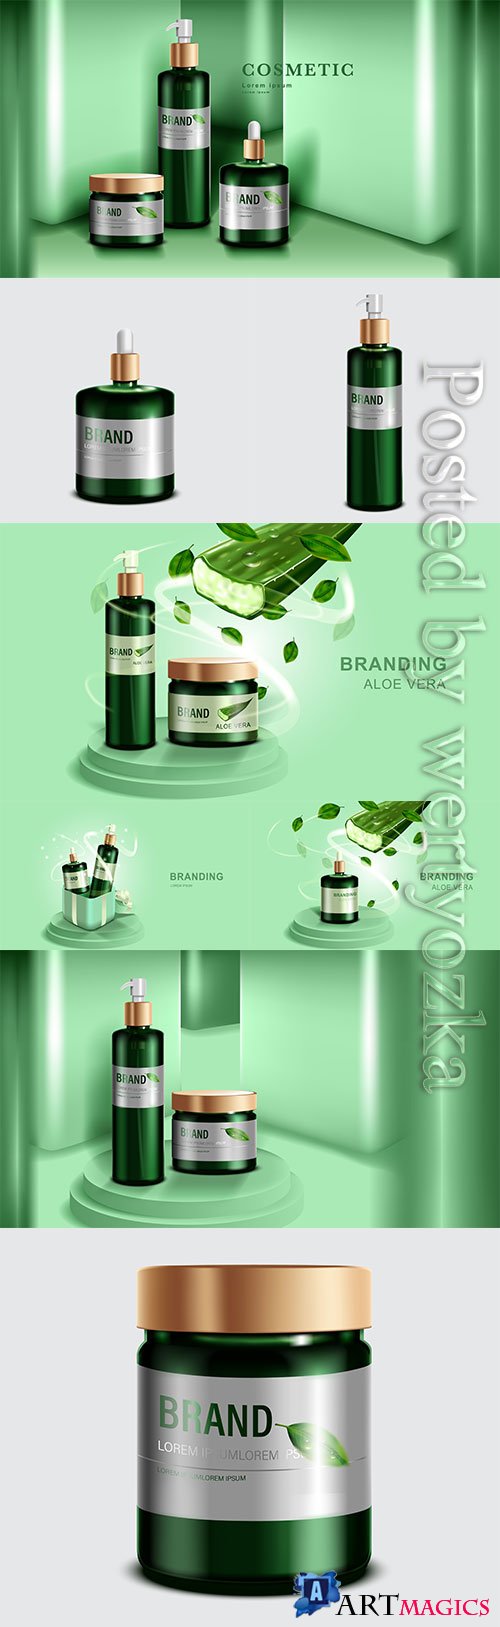 Cosmetics or skincare product, green bottle and green wall background